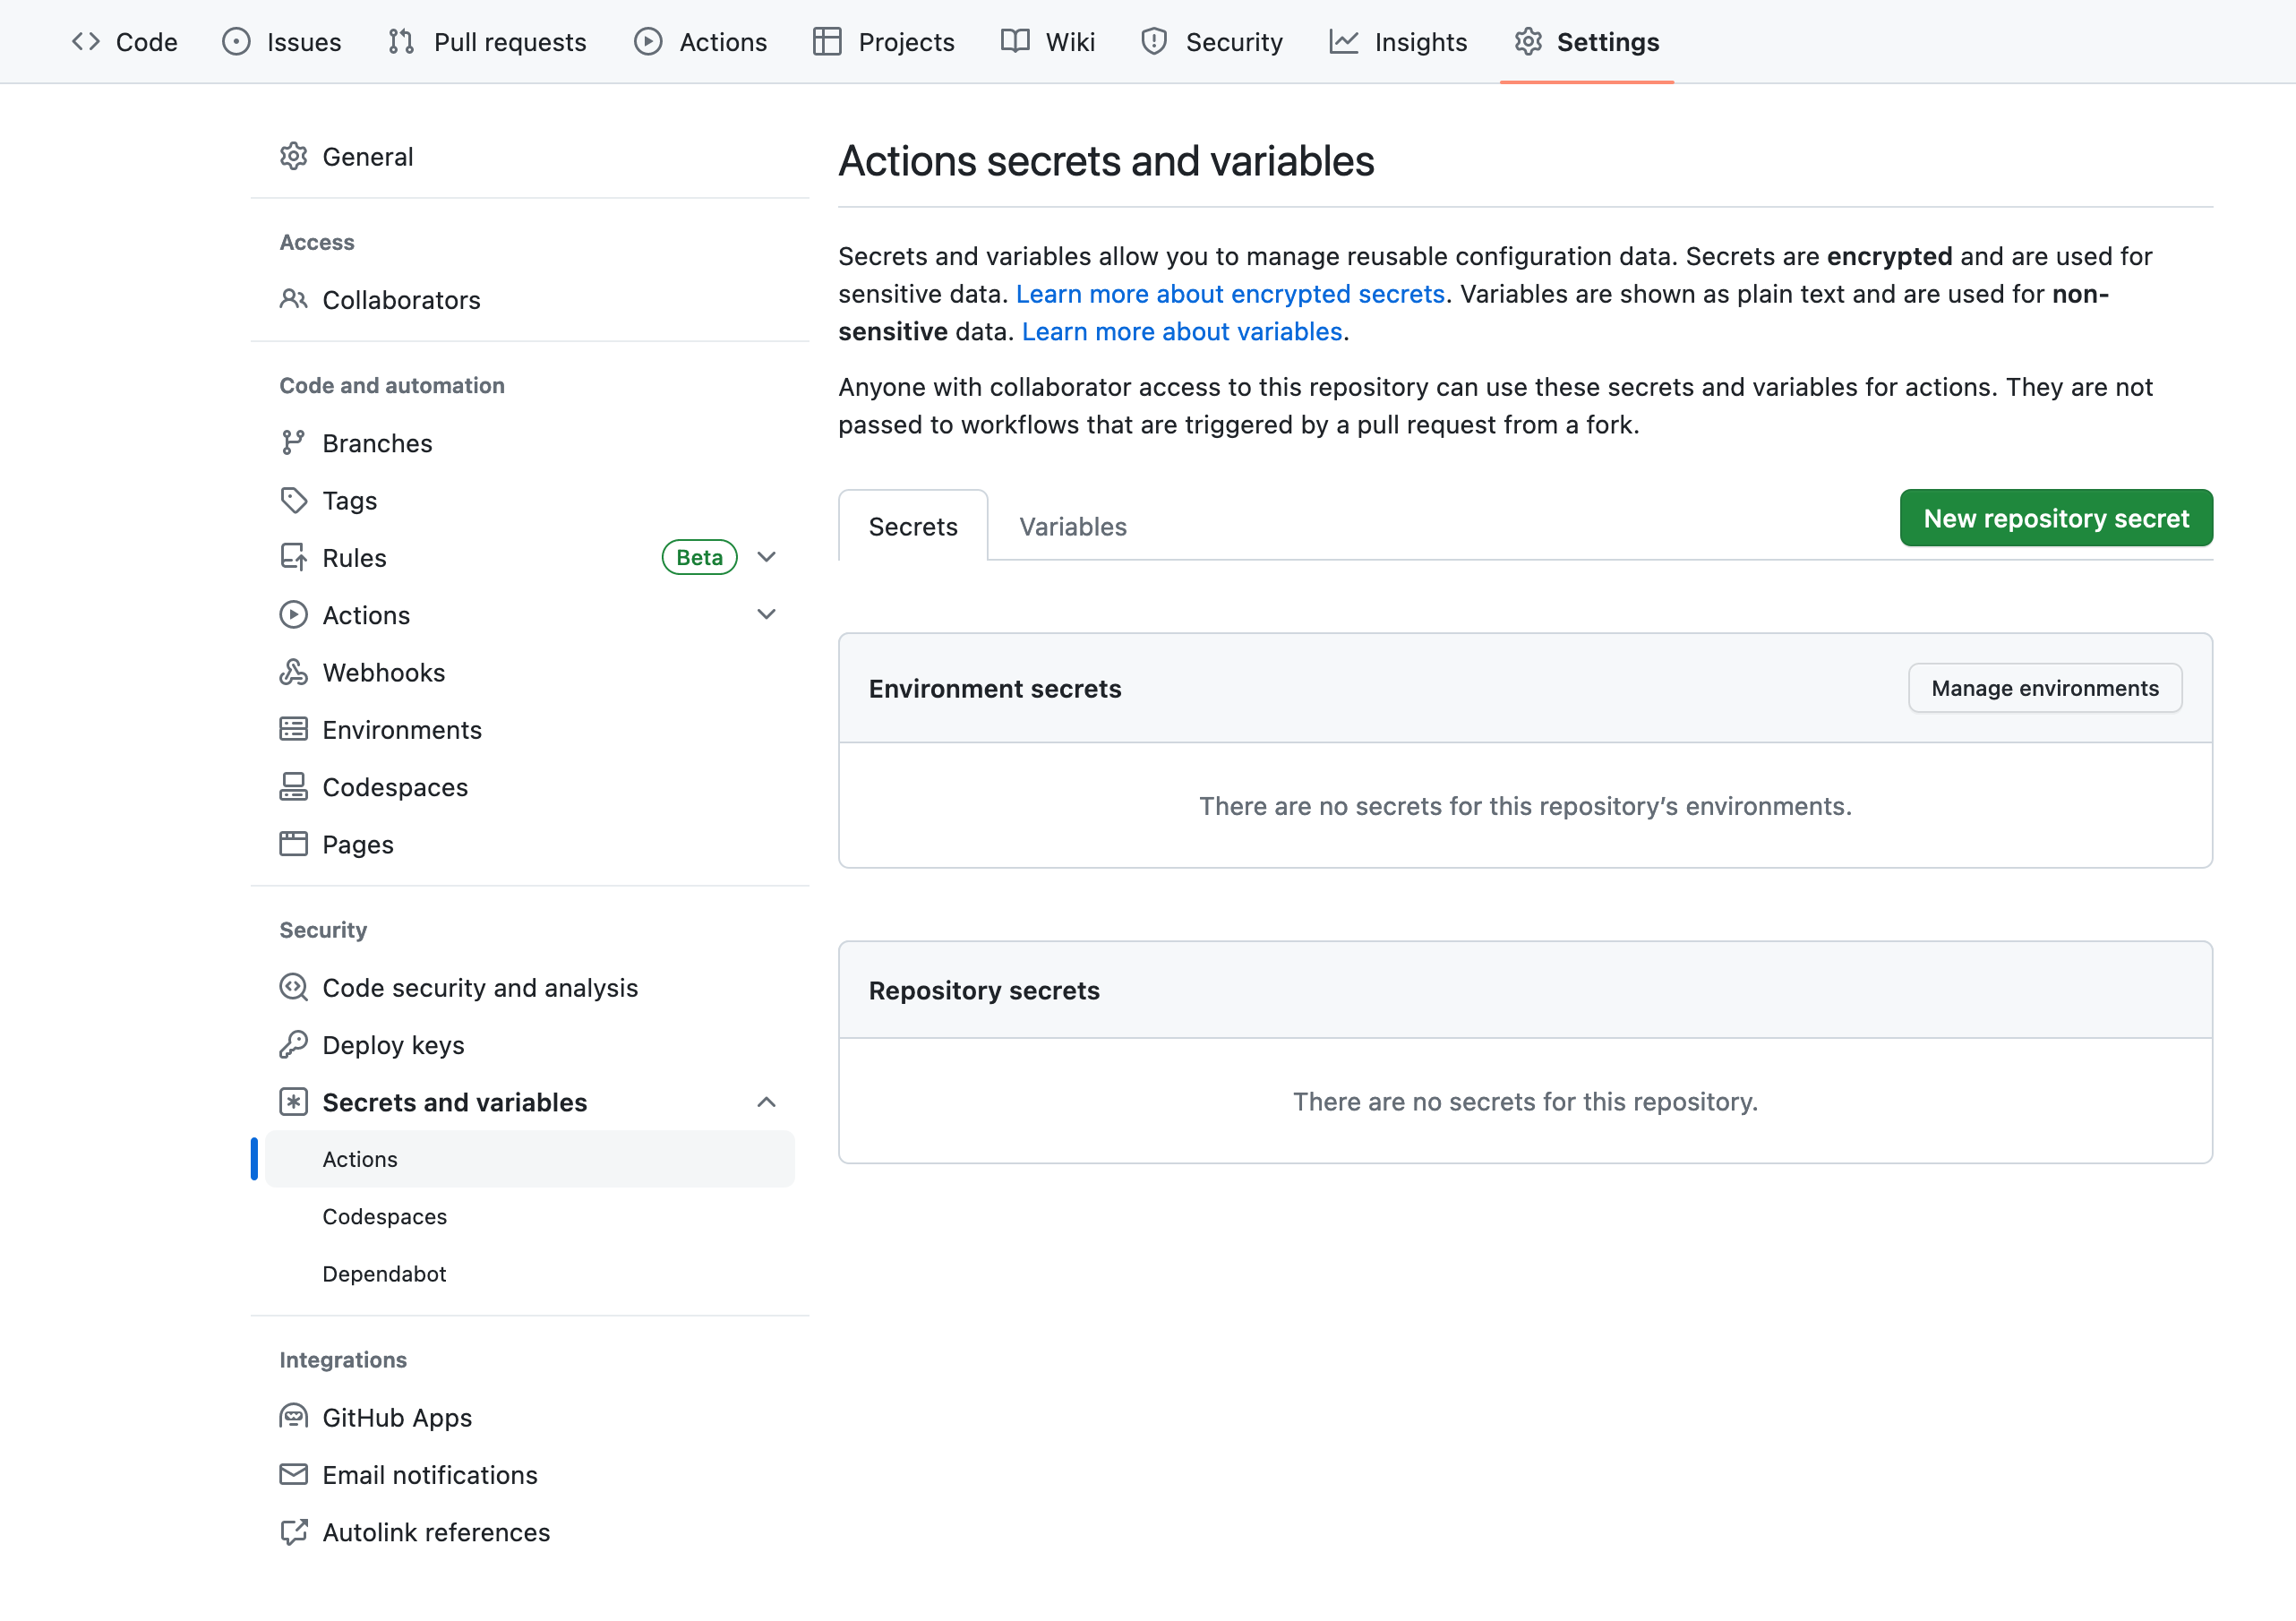 Manually setting GitHub repository secrets and variables - 01